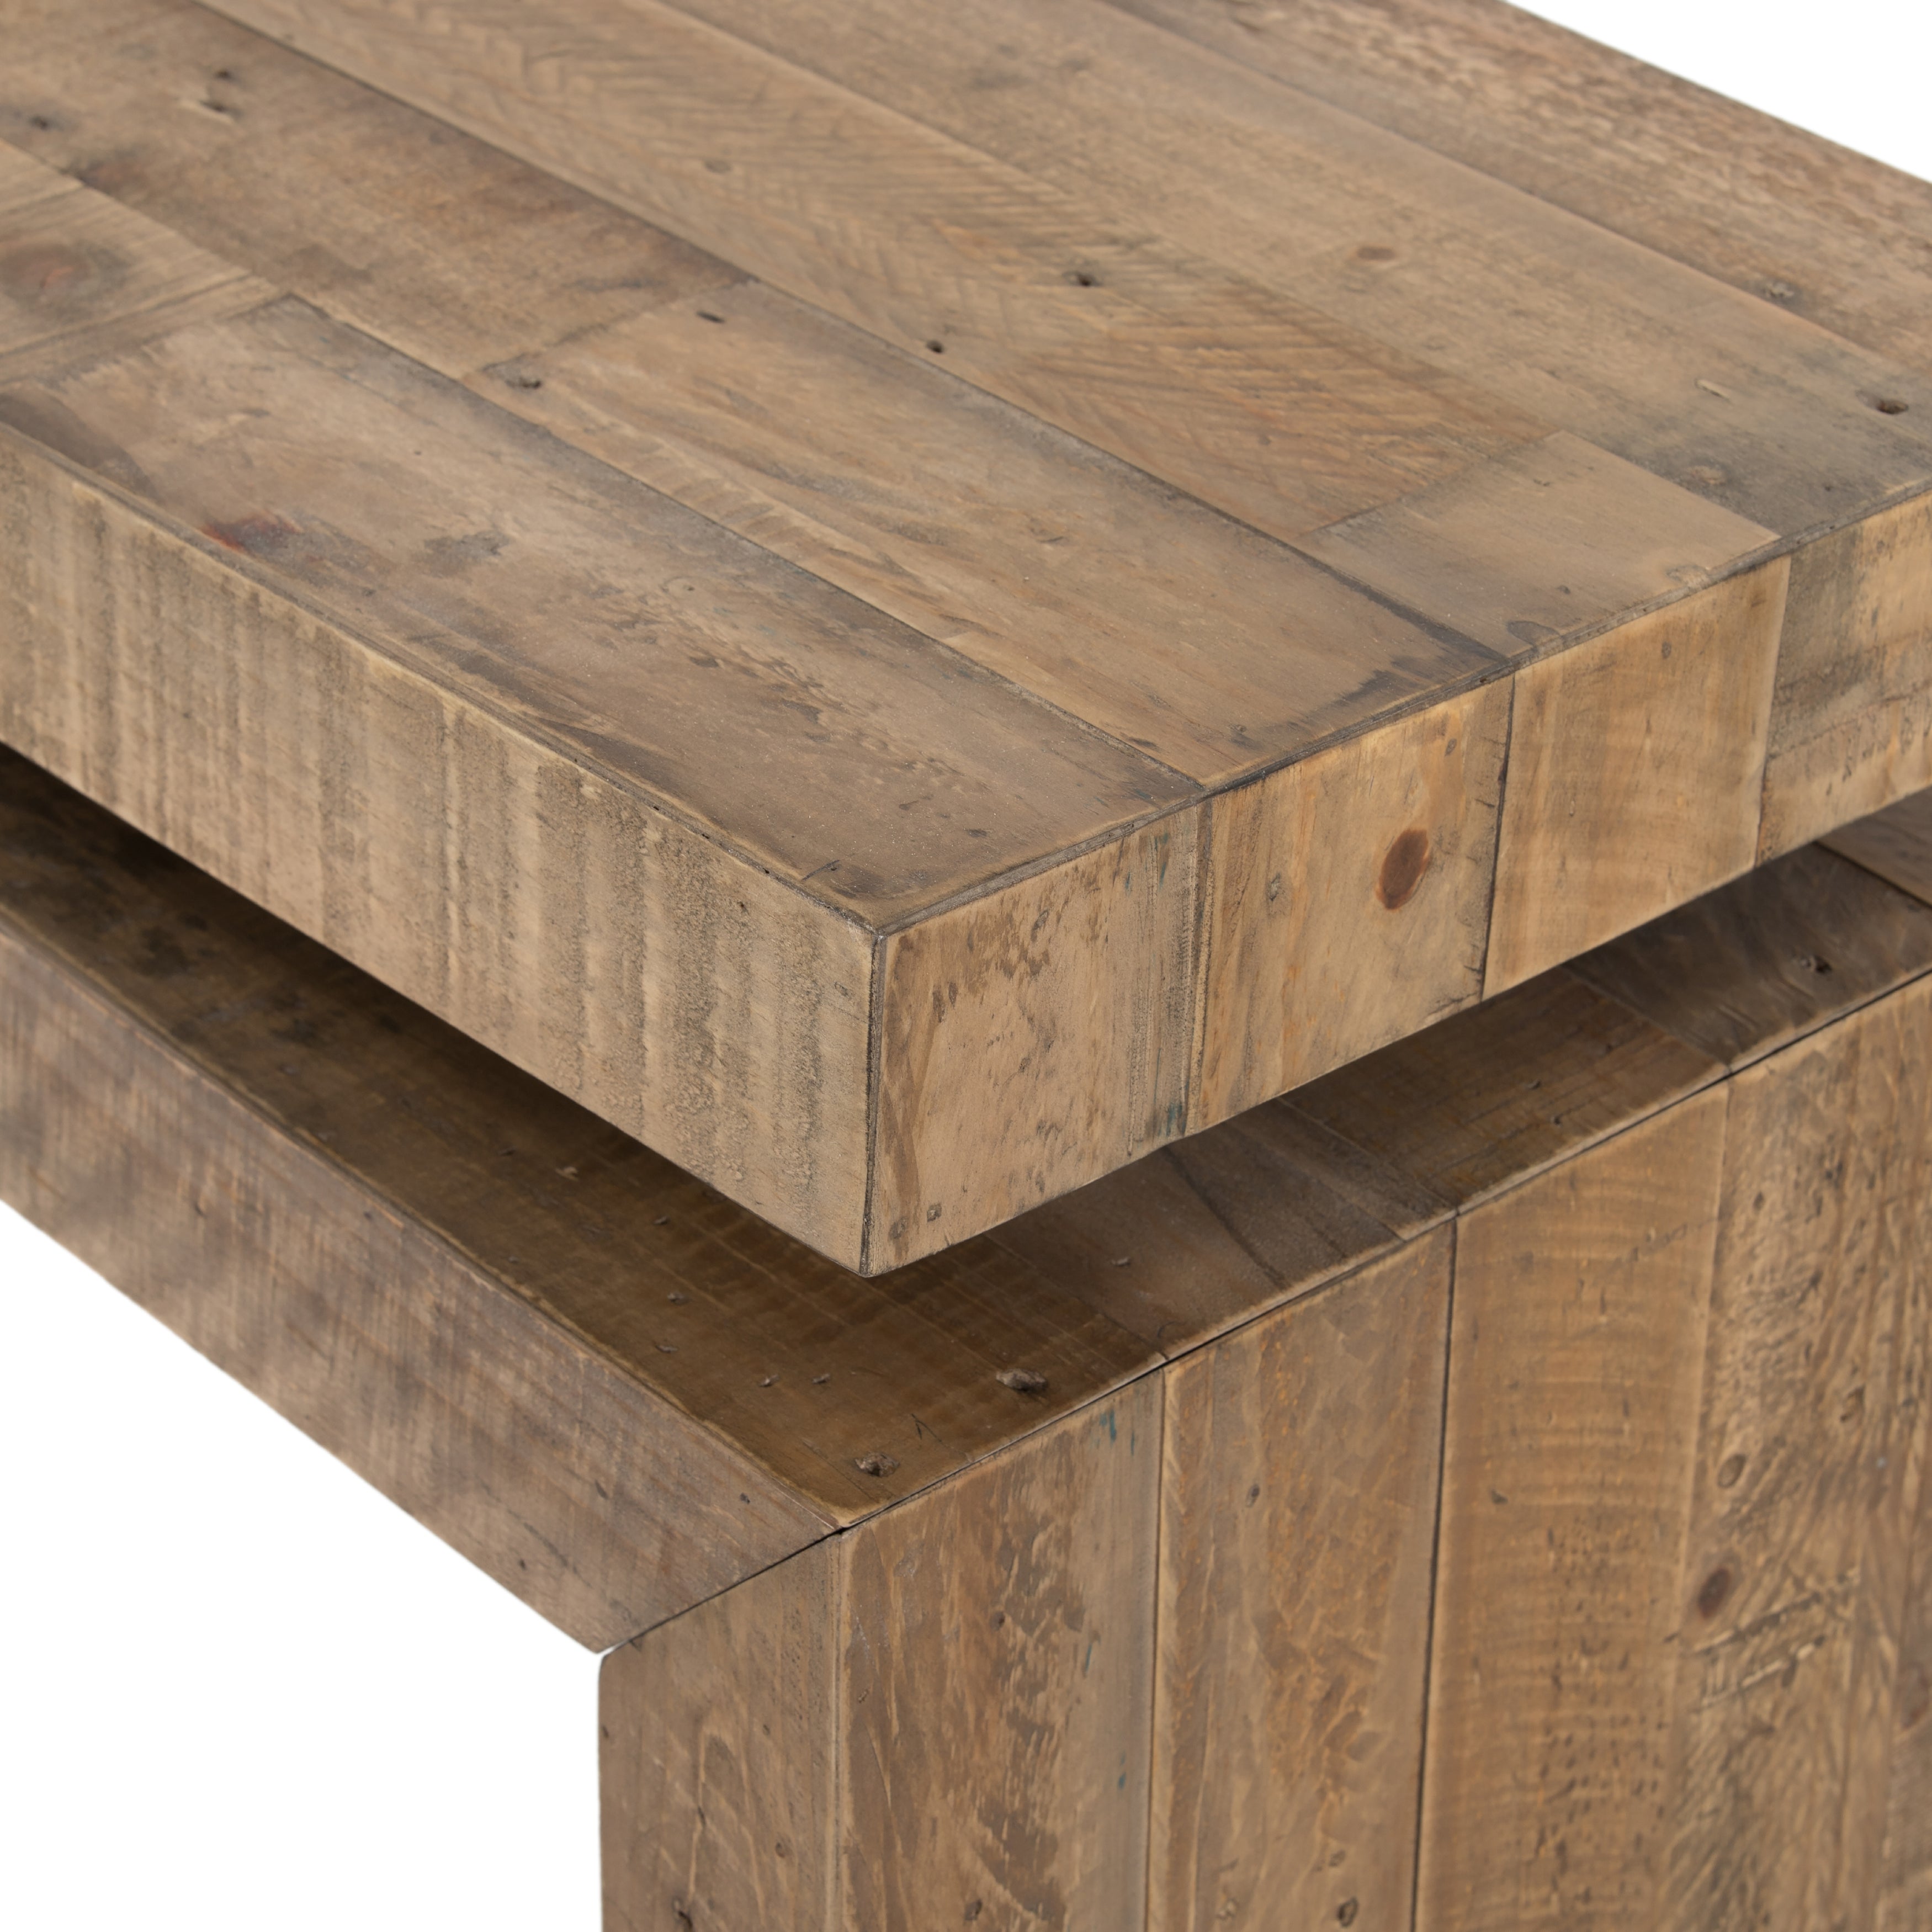 Simple and streamlined to showcase natural beauty. Mixed reclaimed woods fashion a modern media console, for an open look with organic vibes. Amethyst Home provides interior design, new home construction design consulting, vintage area rugs, and lighting in the San Diego metro area.